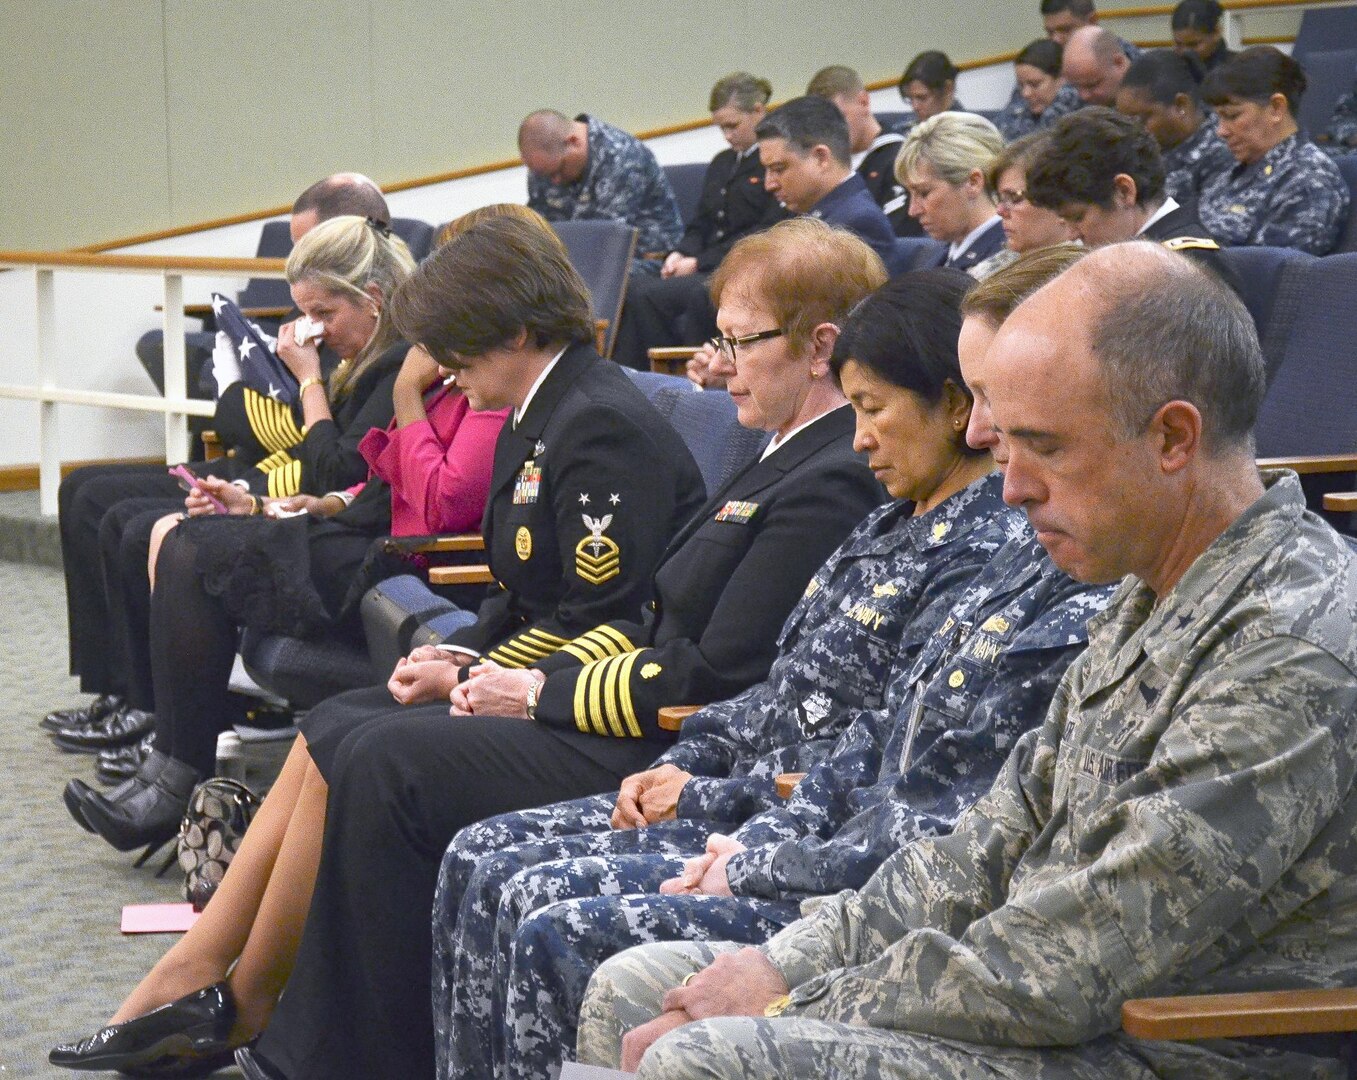 Senior Navy and Air Force personnel bow their heads during the benediction at a celebration of life memorial ceremony Jan. 25 at Joint Base San Antonio-Fort Sam Houston. The ceremony was held to remember Seaman Nenit Coltra, who worked at the Medical Education and Training Campus before she passed away Dec. 28, 2015, at 23 years old.